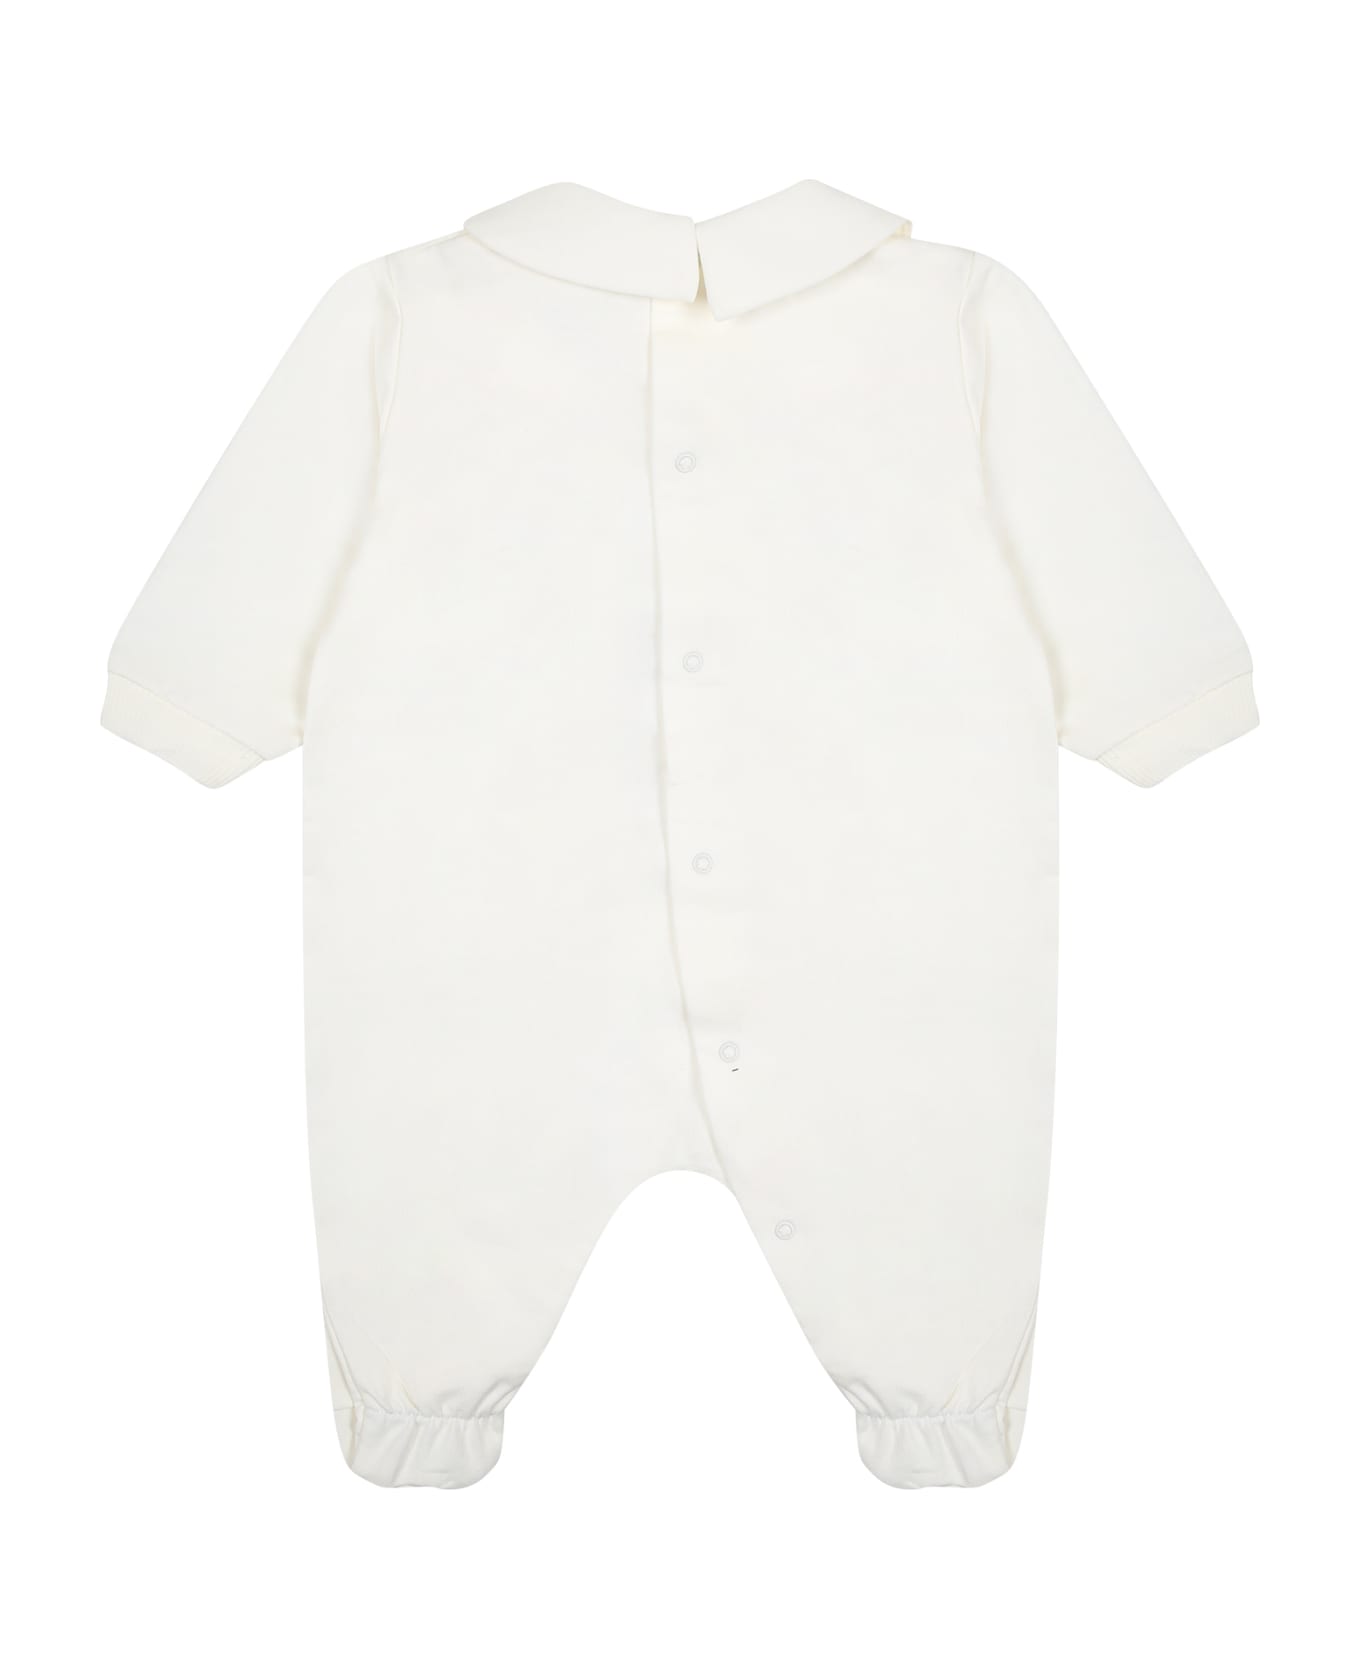 Moschino White Set For Babies With Teddy Bear - White